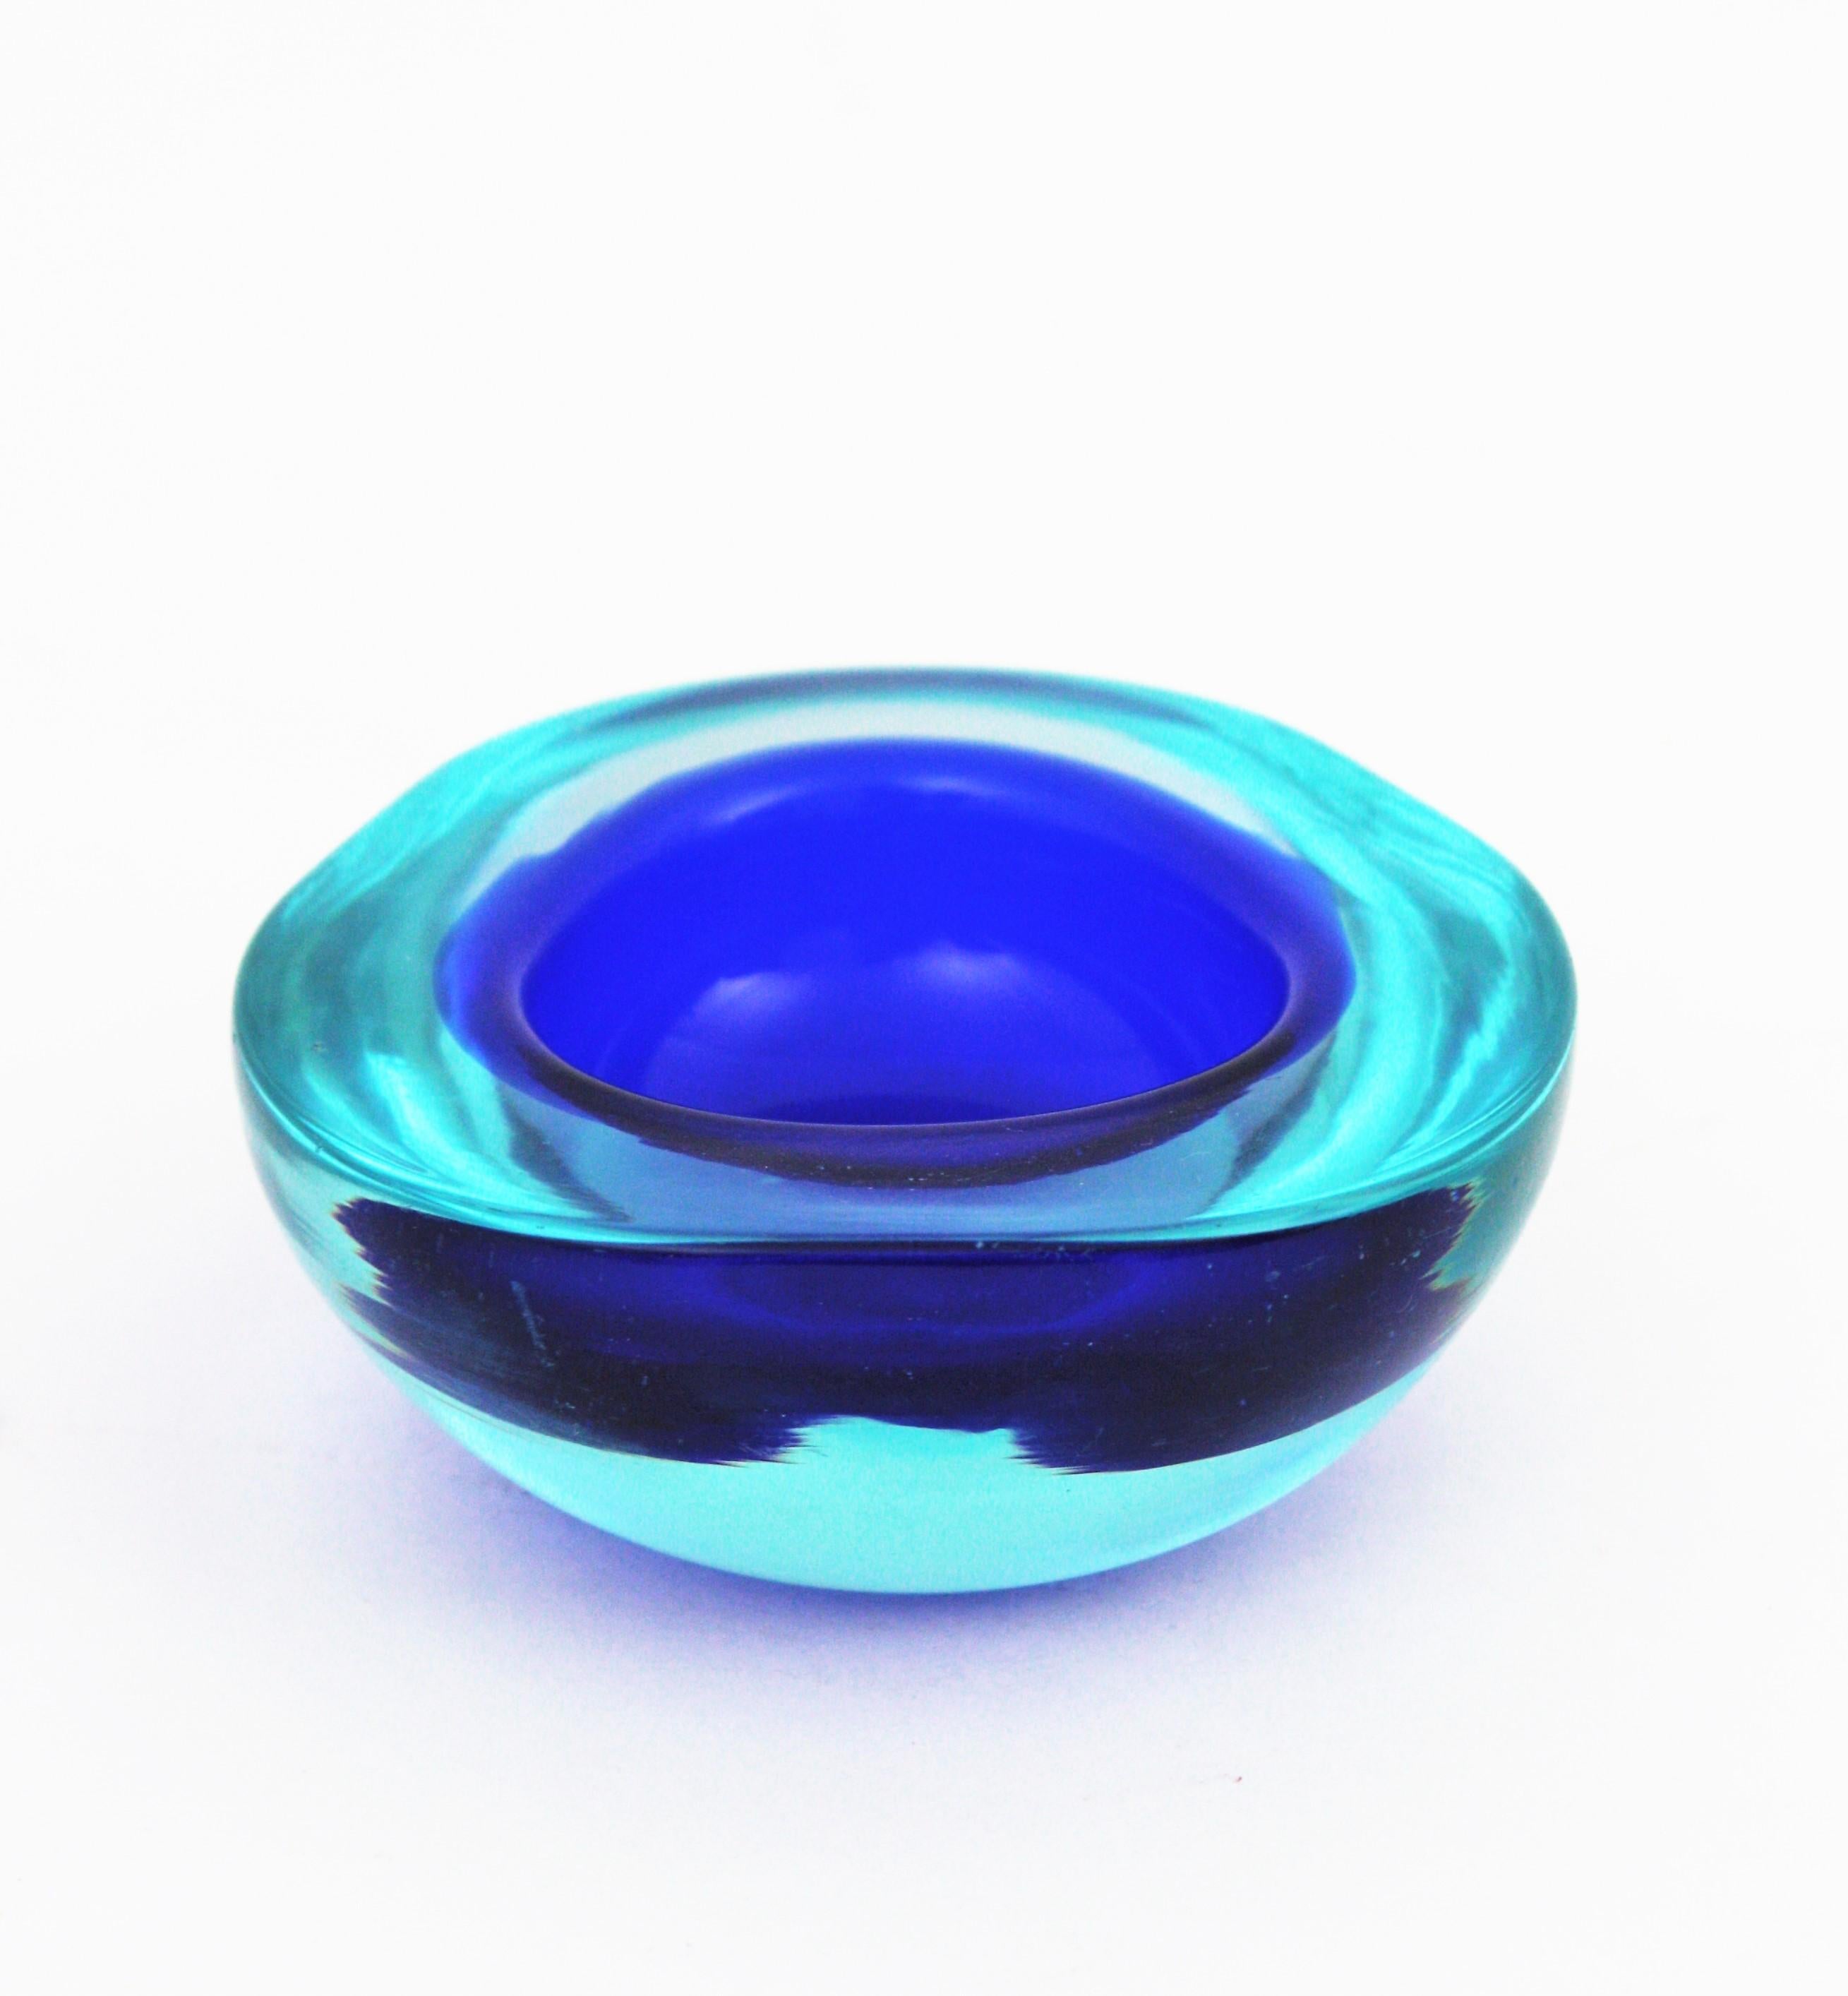 Archimede Seguso Murano Small Sommerso Blue Glass Geode Bowl, 1960s For Sale 5